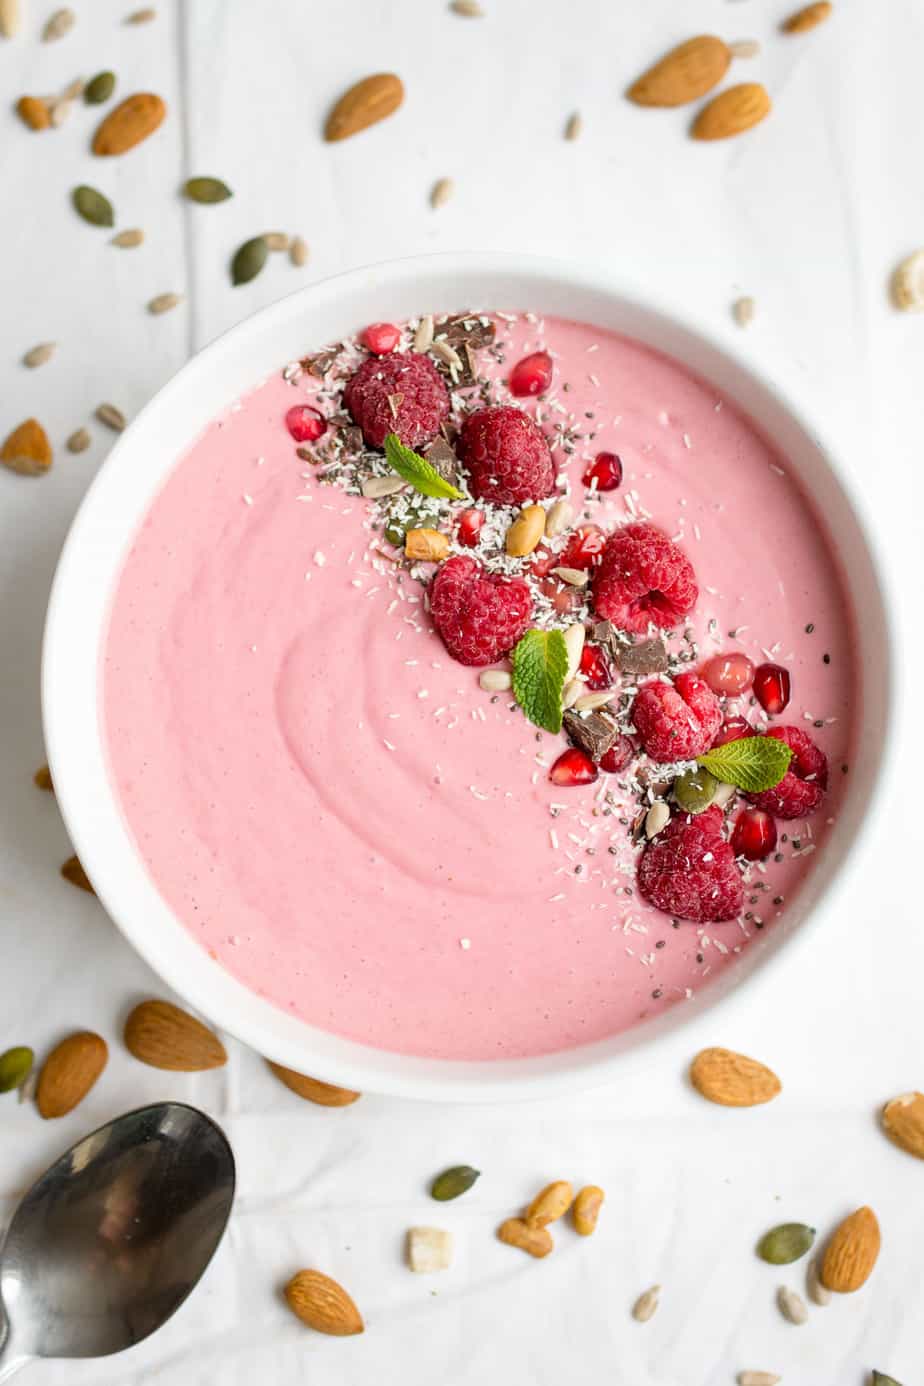 10 Mouthwatering Smoothie Bowls - 10 Easy smoothie bowl recipes that will have you drooling. Not only are they beautiful and delicious but also packed with healthy ingredients.